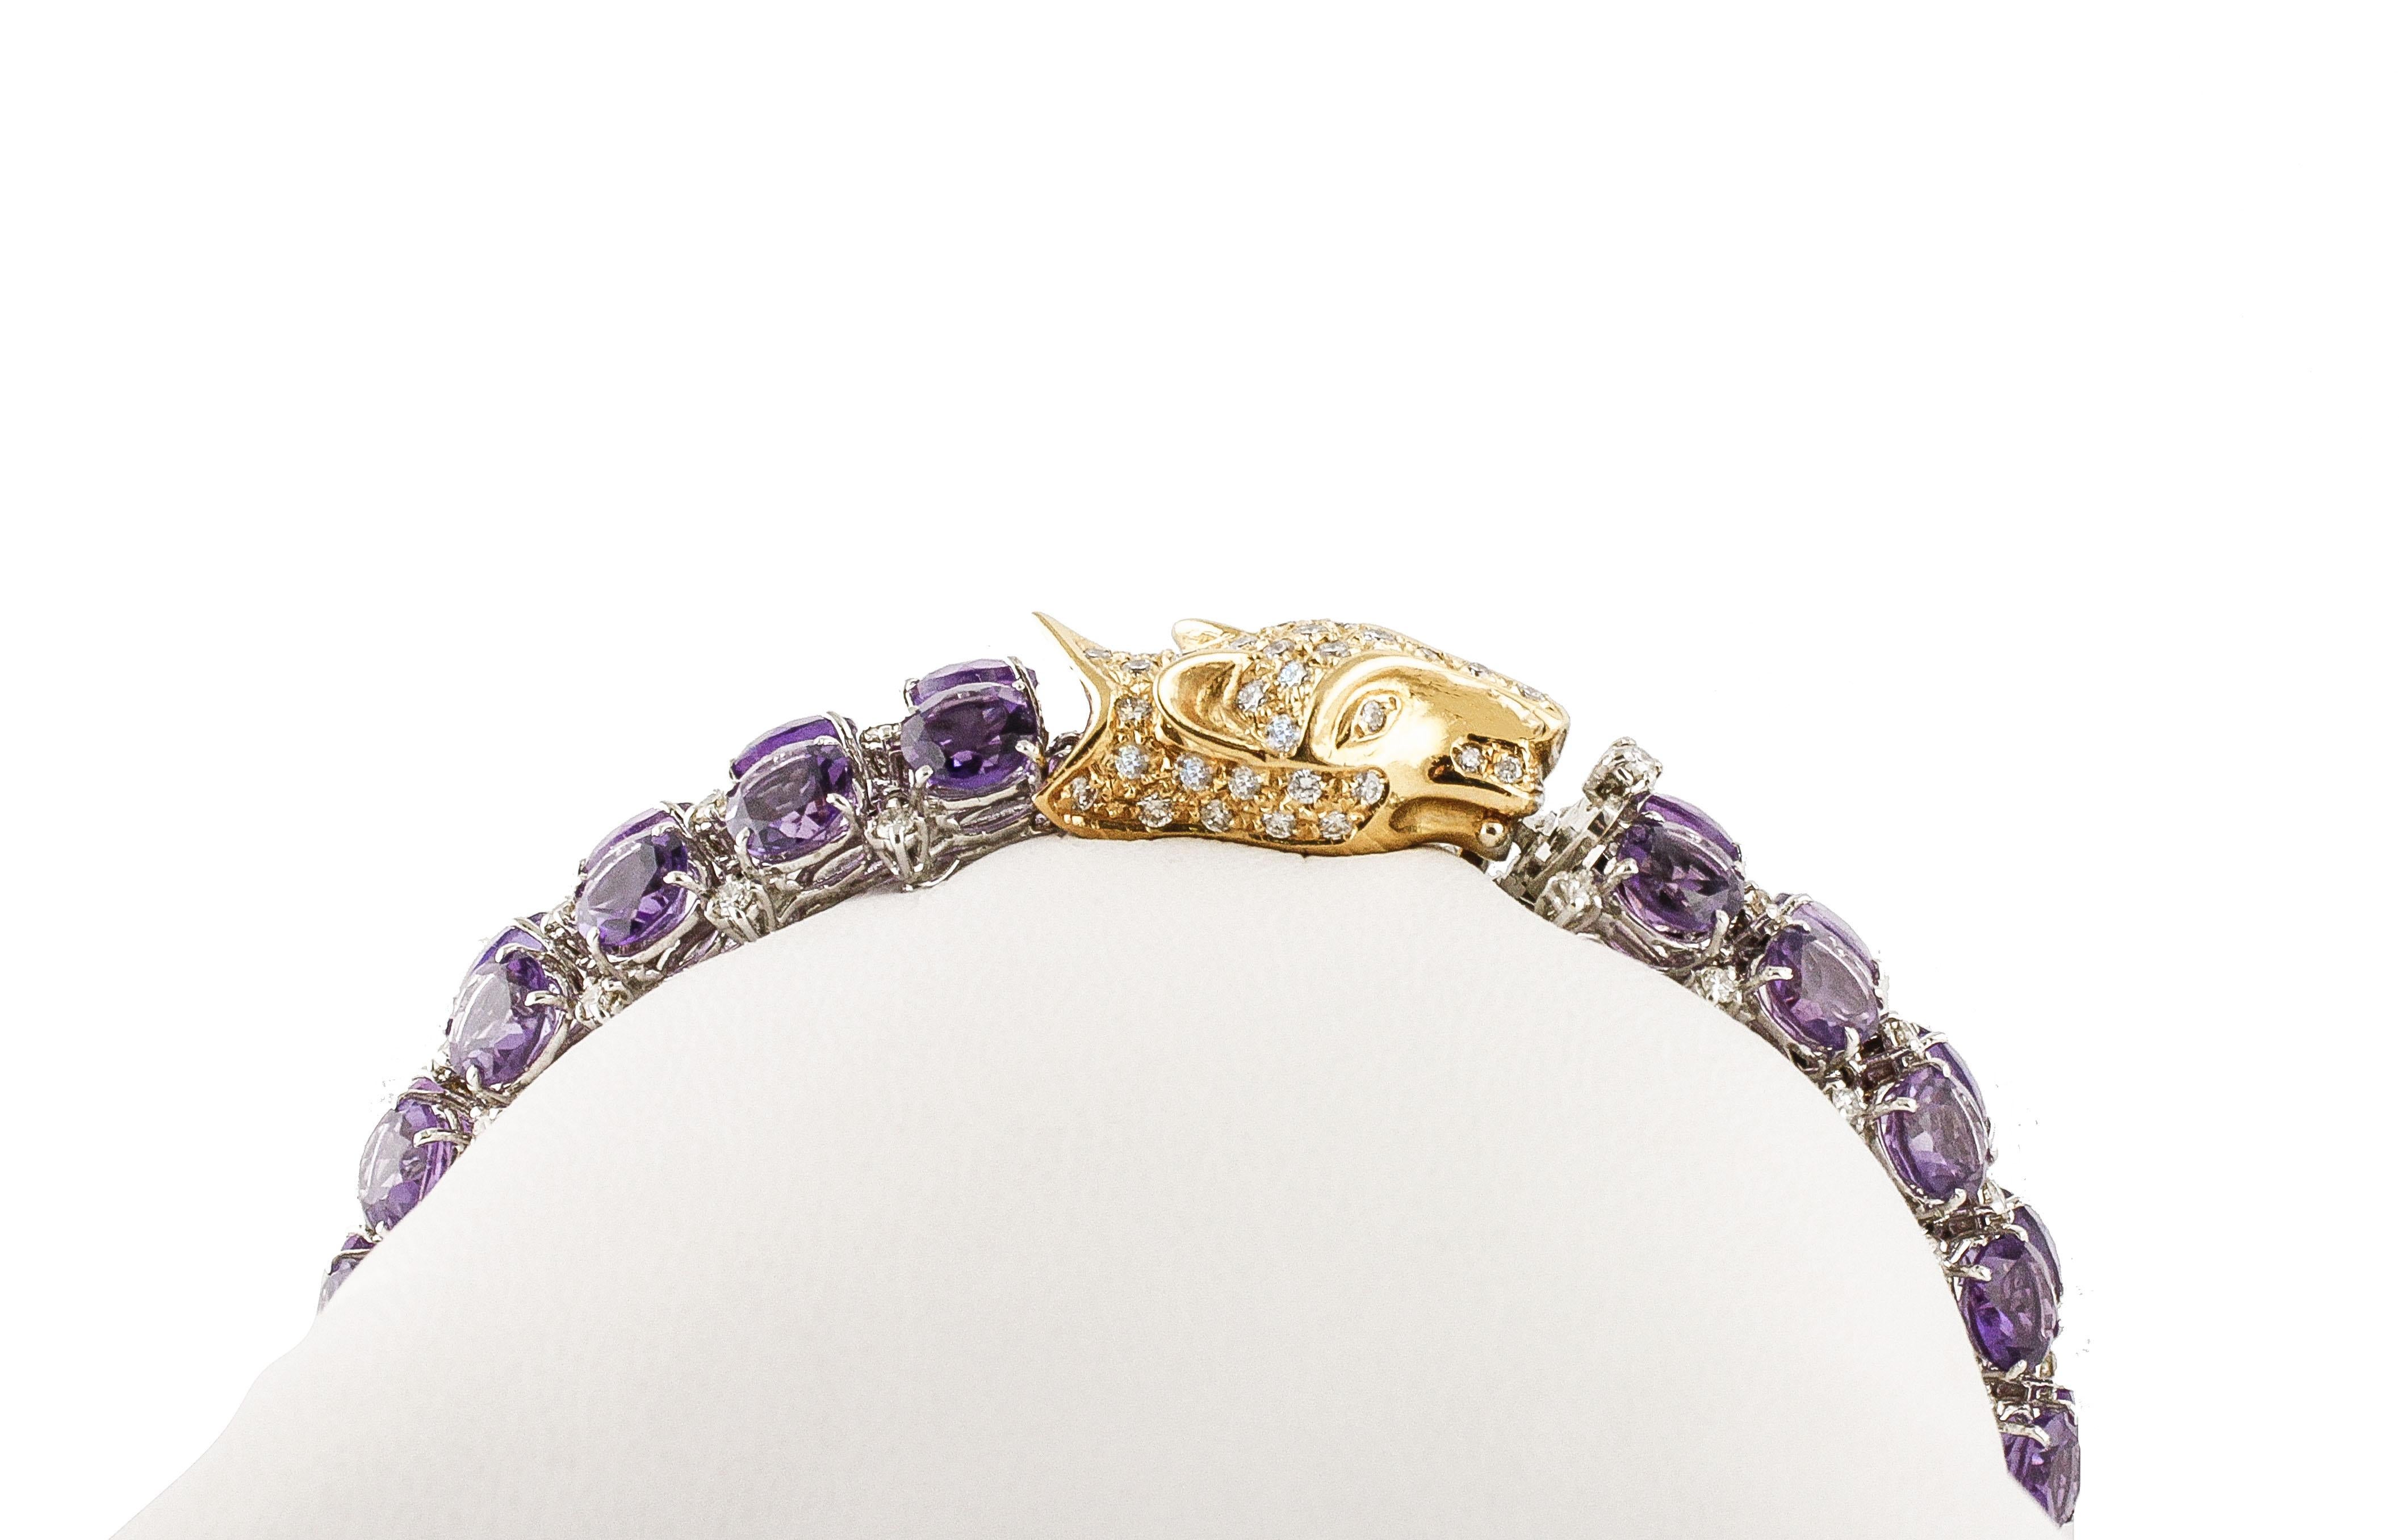 Gorgeous link bracelet in 18K white gold structure all studded by 34.38 ct of intense color two amethysts rows and adorned by little white diamonds three rows.
The closure of the bracelet is an wolf head in 18K yellow gold embellished by shining